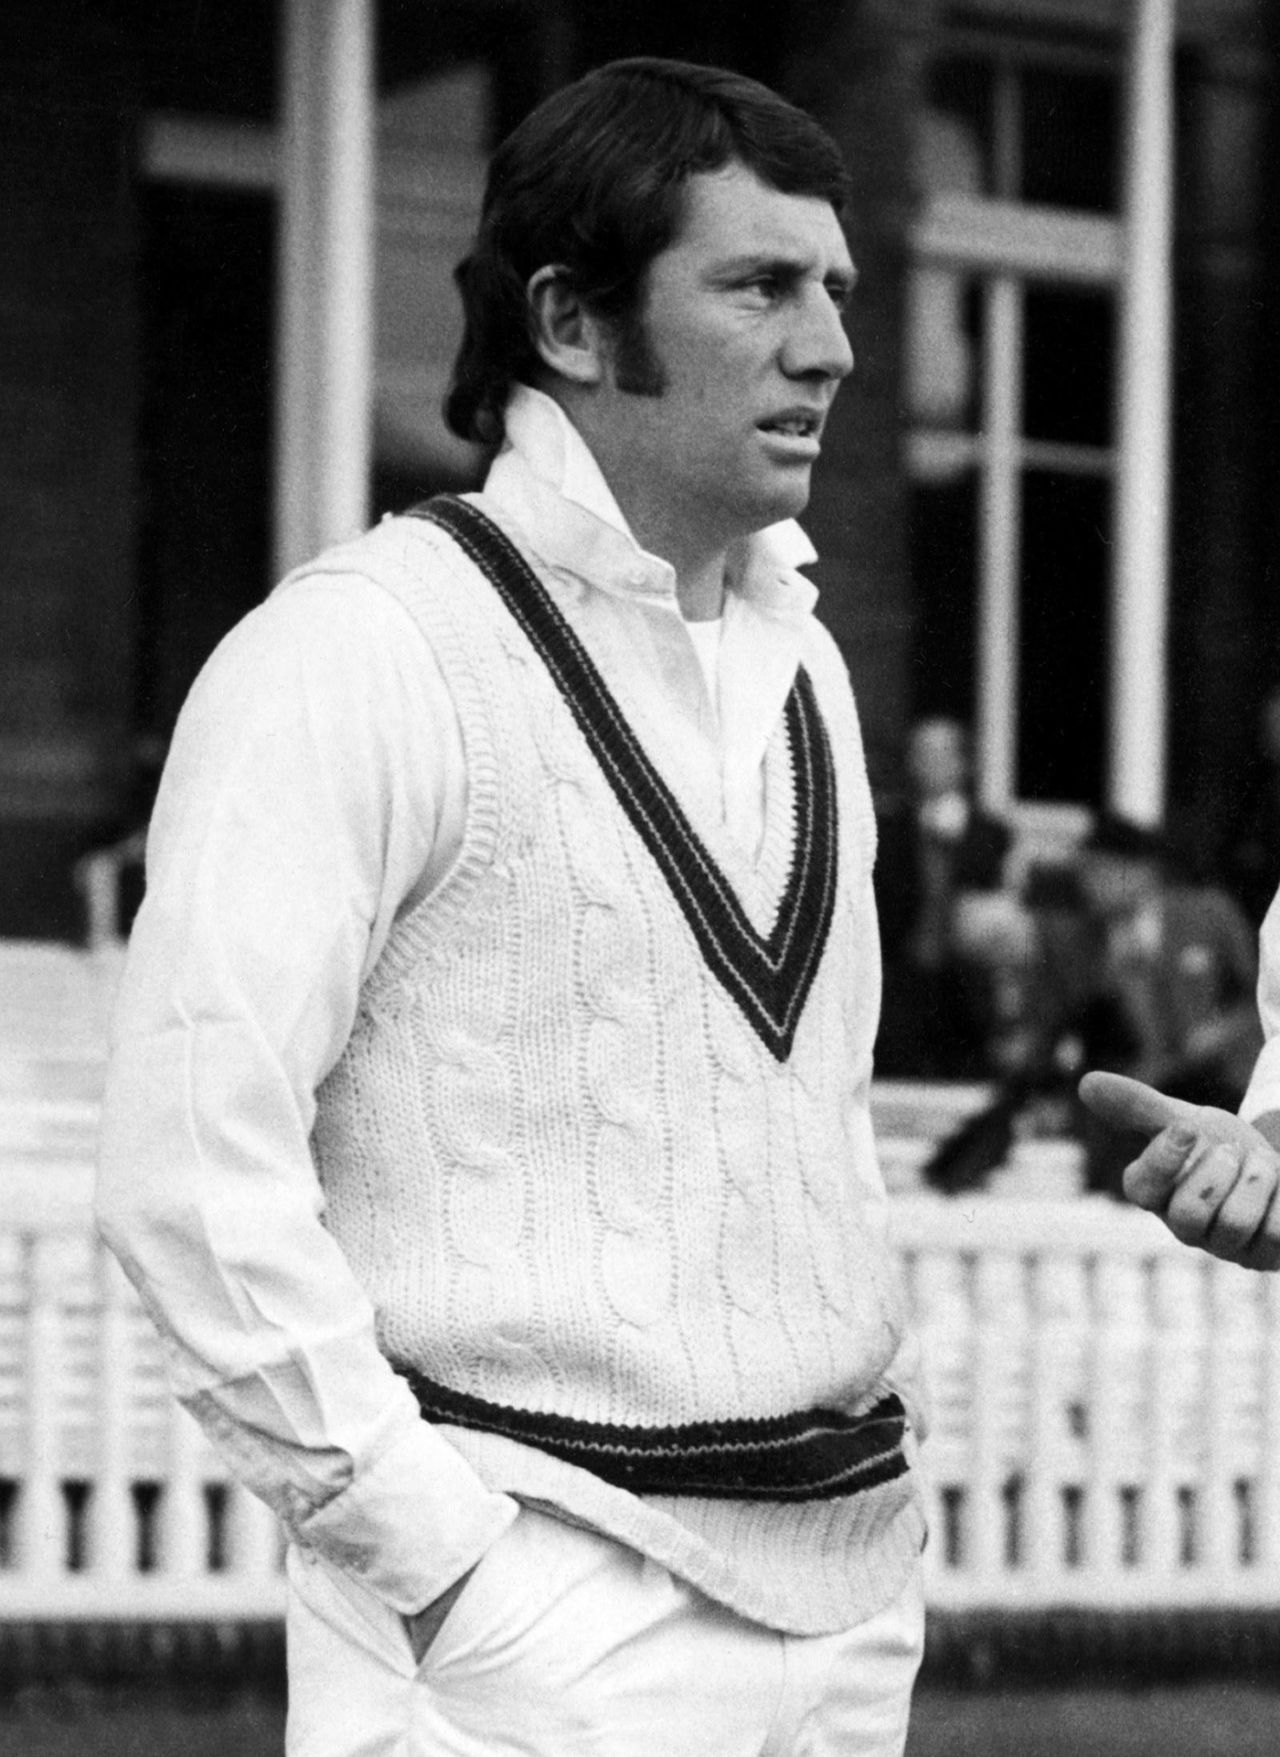 Ian Chappell on the first day of the Lord's Test, England v Australia, 2nd Test, Lord's, 1st day, June 22, 1972